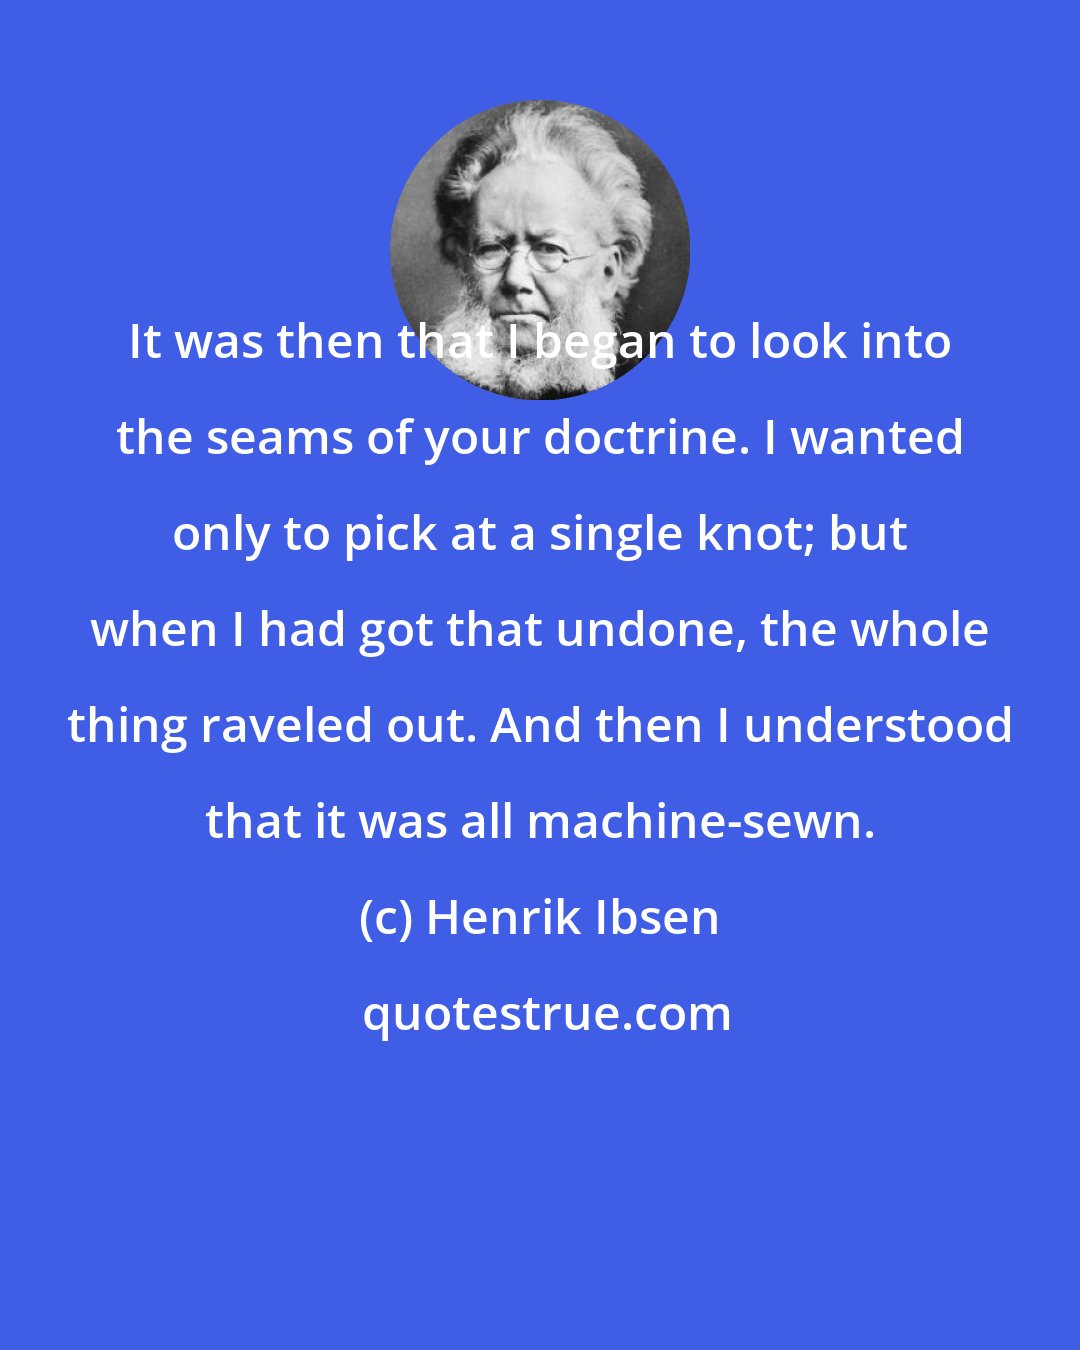 Henrik Ibsen: It was then that I began to look into the seams of your doctrine. I wanted only to pick at a single knot; but when I had got that undone, the whole thing raveled out. And then I understood that it was all machine-sewn.